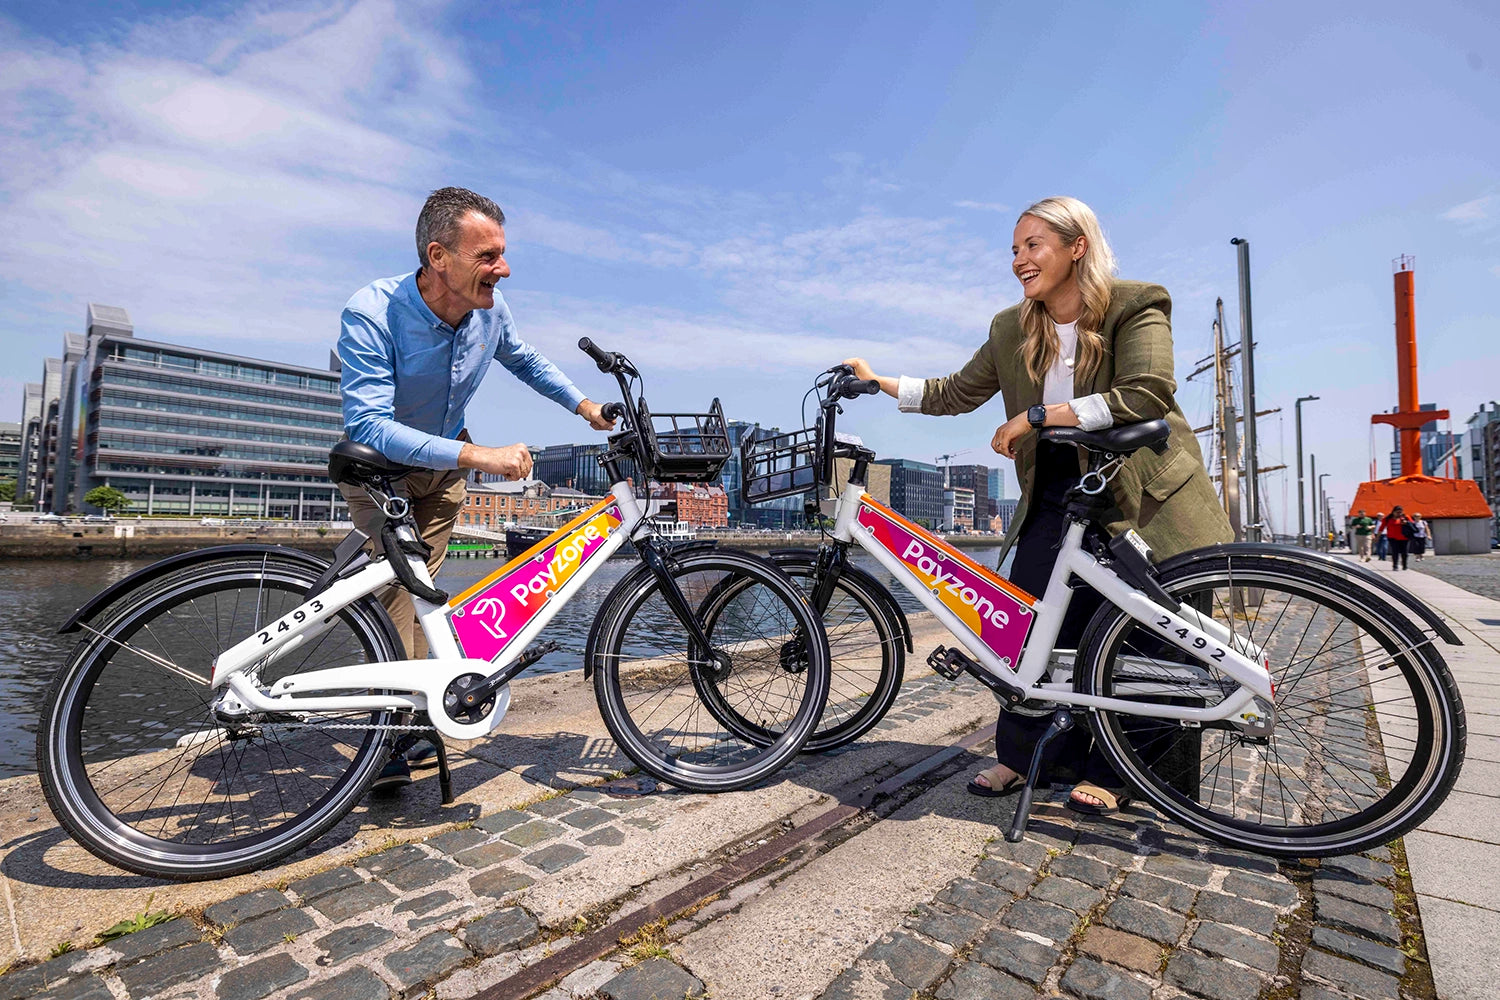 Jim Deignan, CEO of Payzone, and Ciara Donovan, Product Owner Parking Tag at Payzone Ireland, pictured in Dublin docklands with the newly branded Bleeper bikes. The Bleeper bikes have been branded with Payzone's logo on adboards on either side of the bikes. Bleeper is a public bike sharing service which operates across Dublin city.